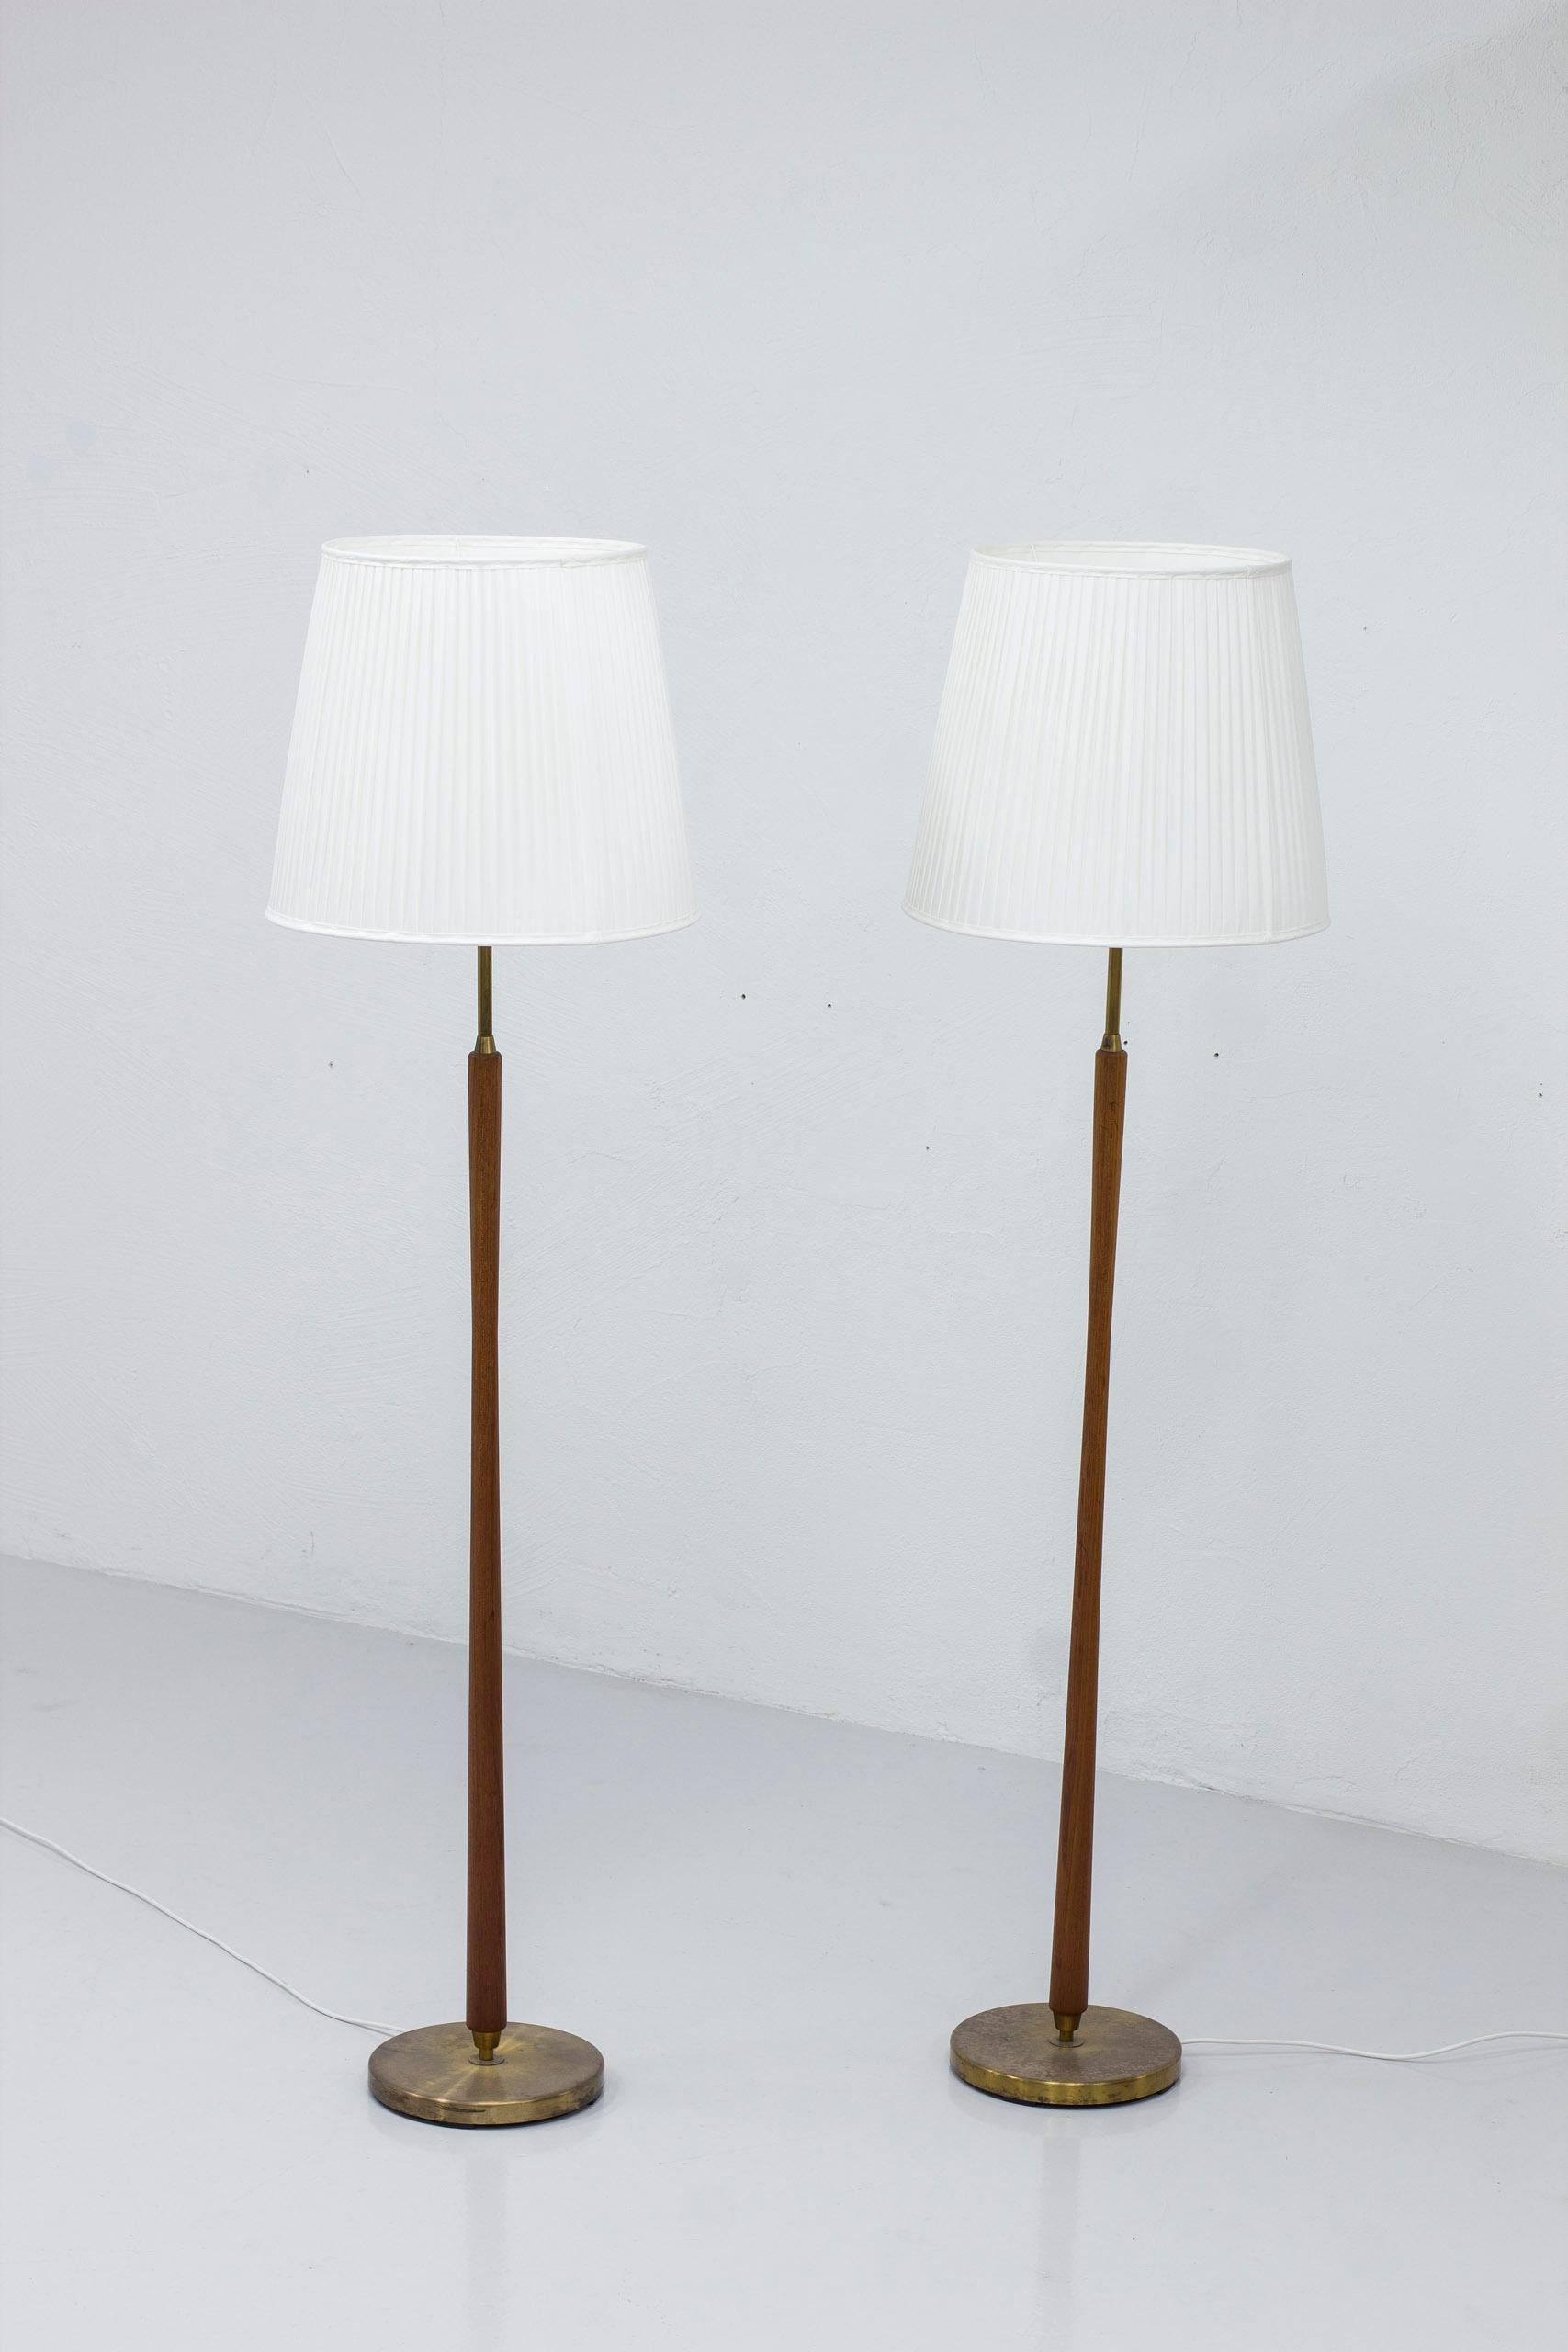 Pair of floor lamps produced in Sweden by ASEA belysning. Made from solid brass and teak stems with a nice concave shape. New lamp shades in hand sewn chintz fabric with single pleating, matching the aluminum uplight fixture. The fixture makes it